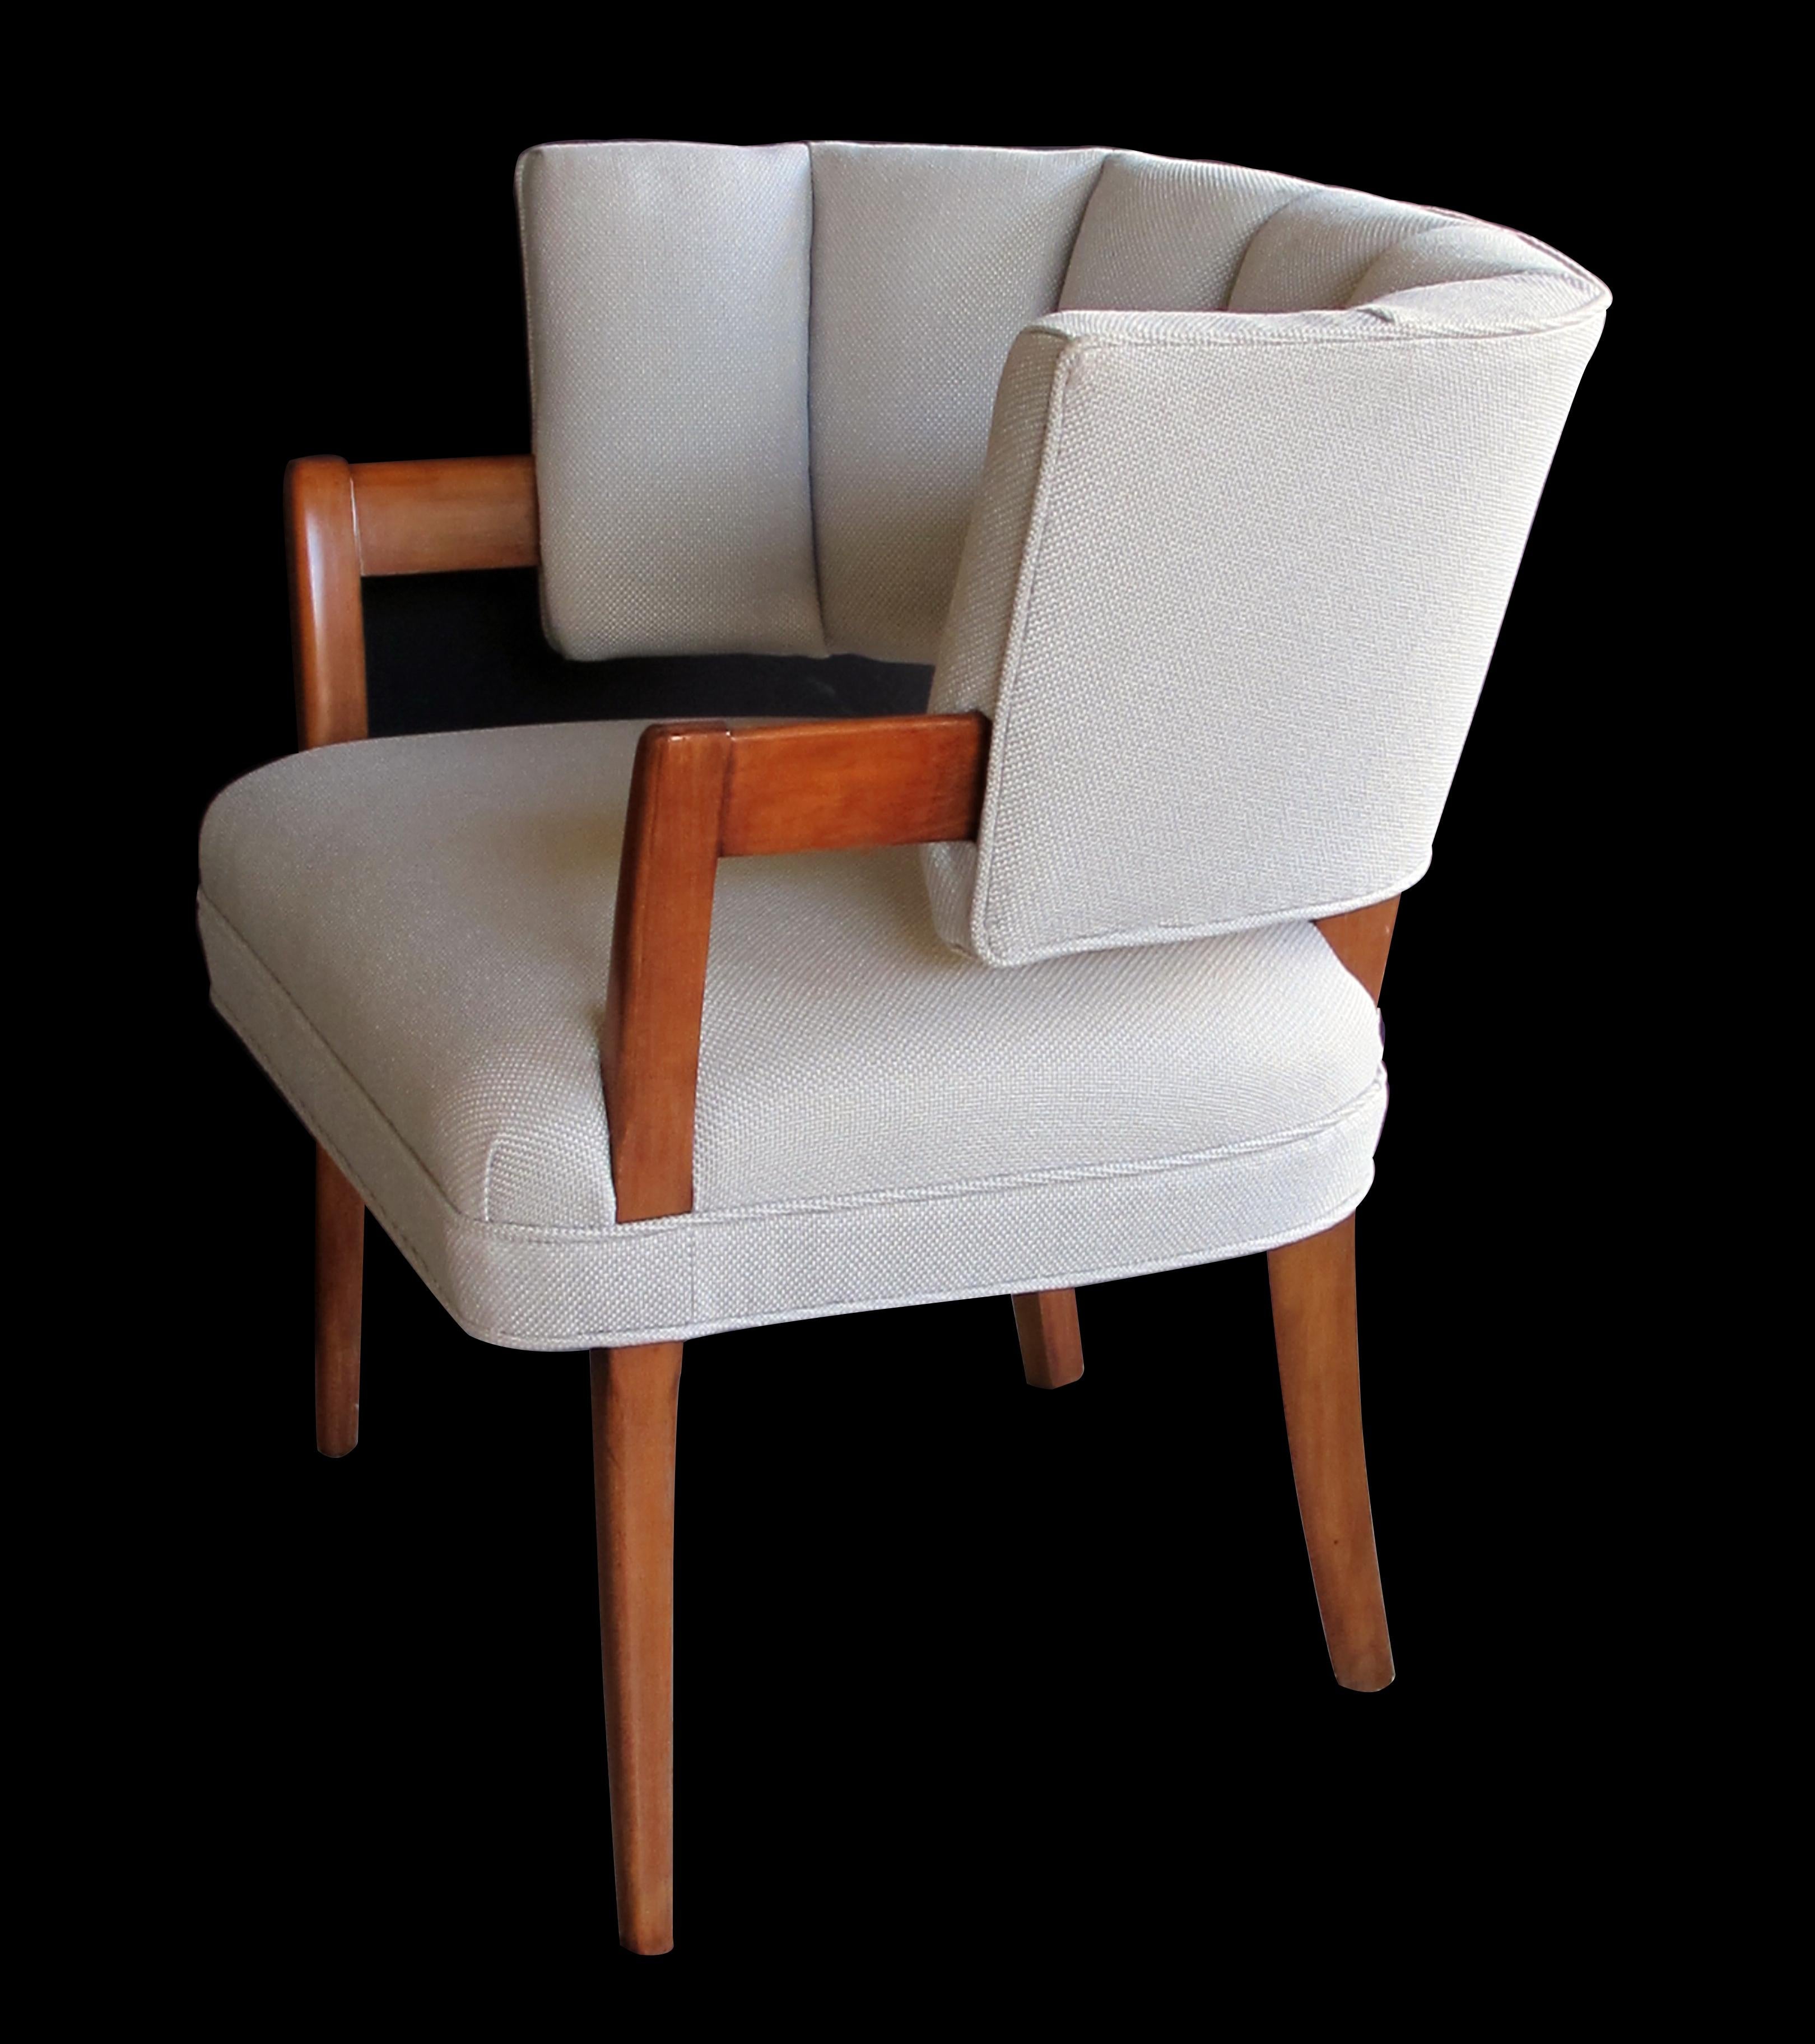 Mid-20th Century Rare and Iconic Pair of American Art Deco Armchairs by Eugene Schoen, New York